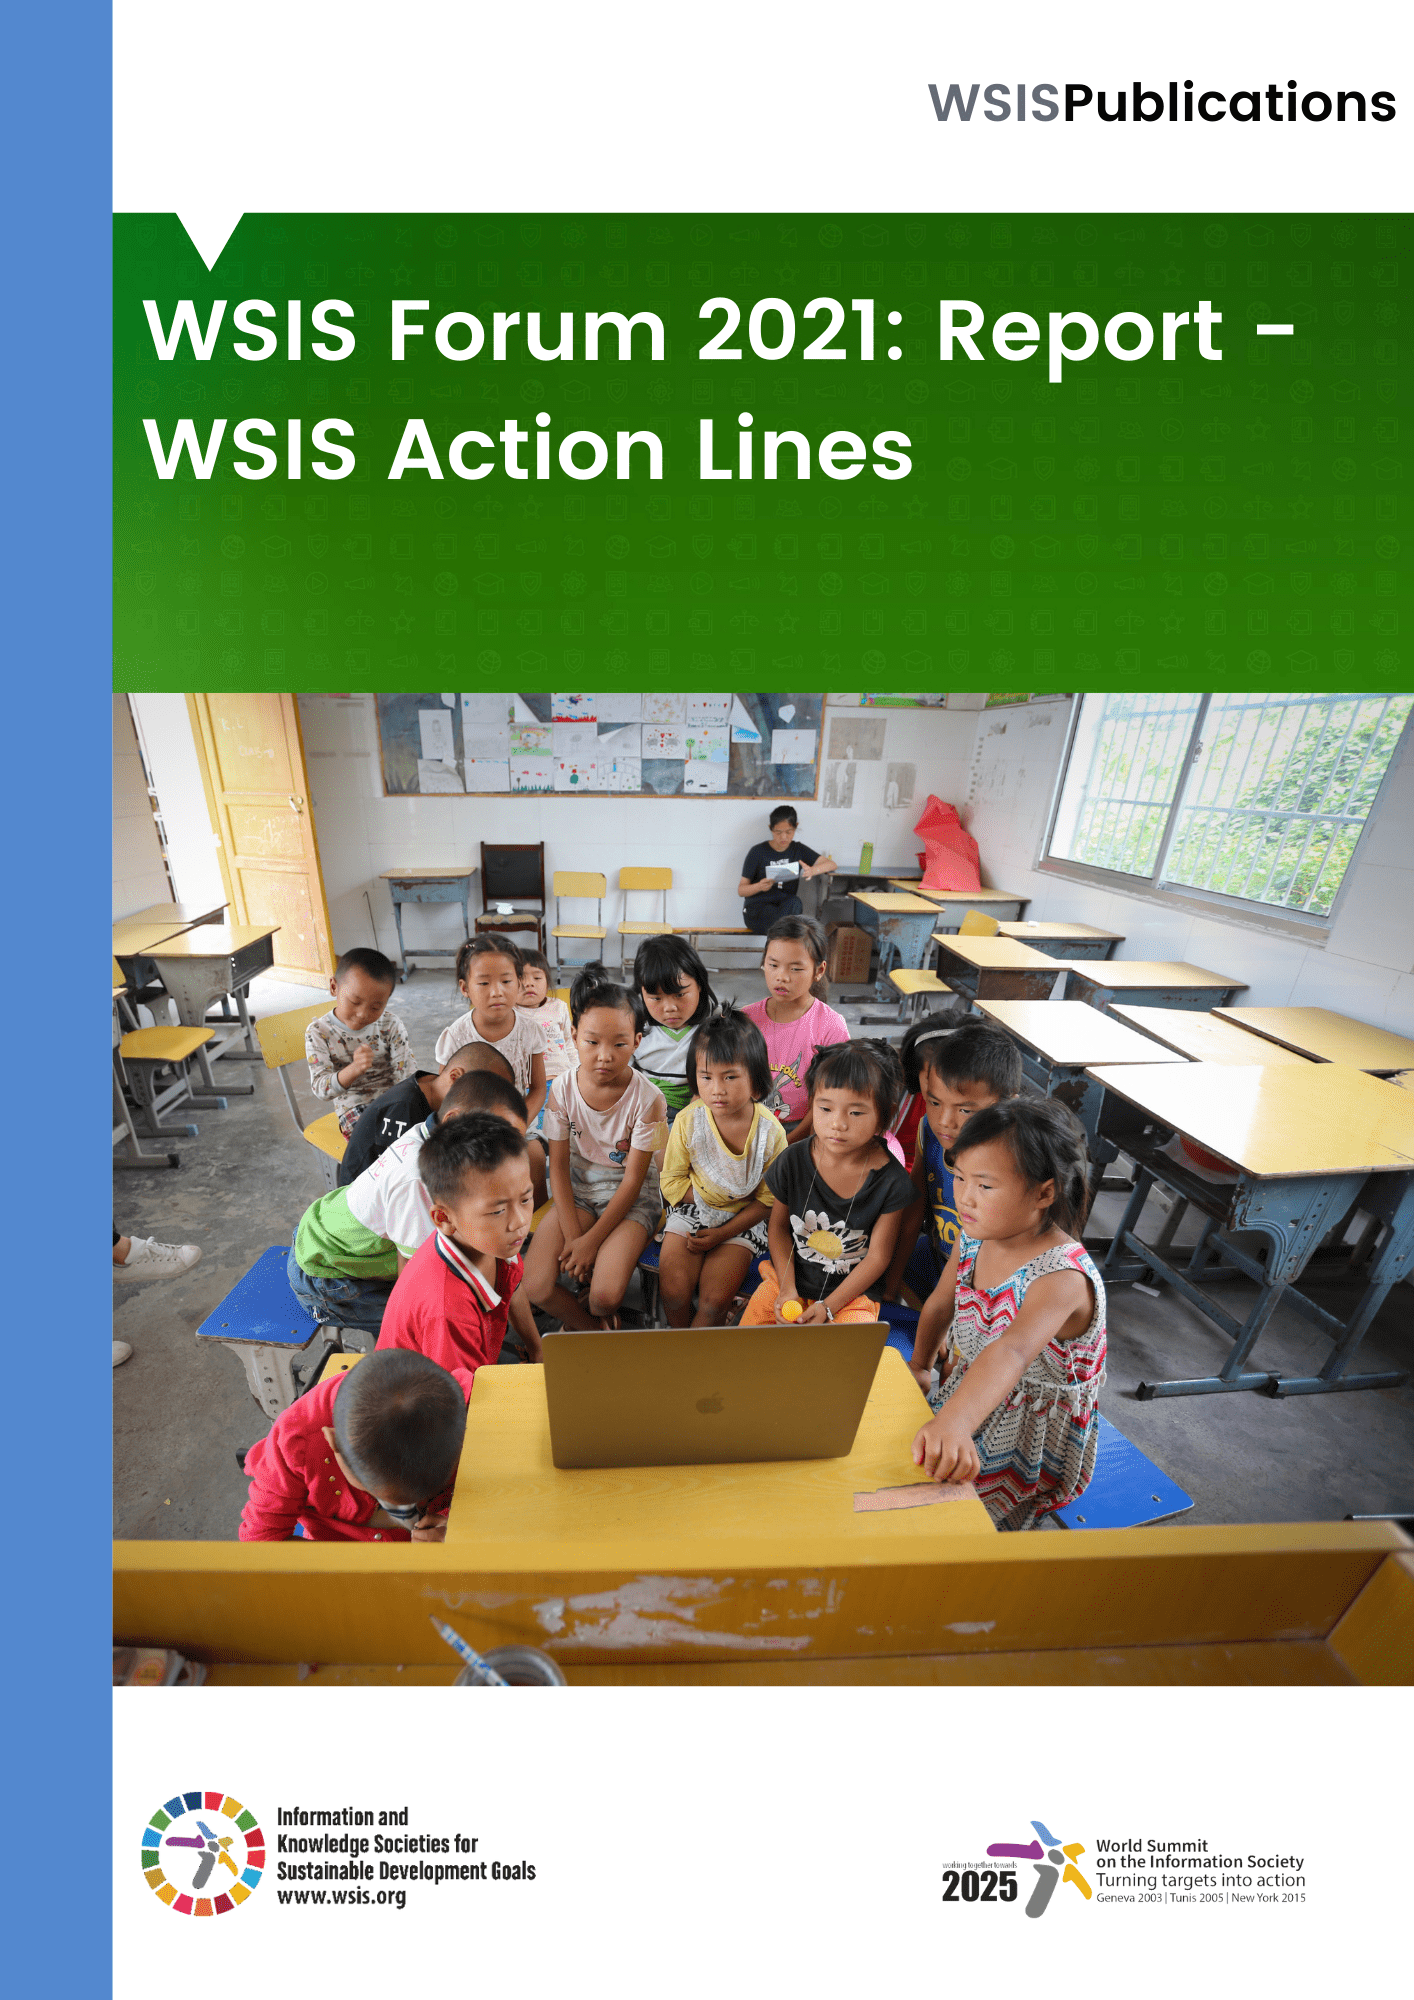 WSIS Forum 2021: Report - WSIS Action Lines